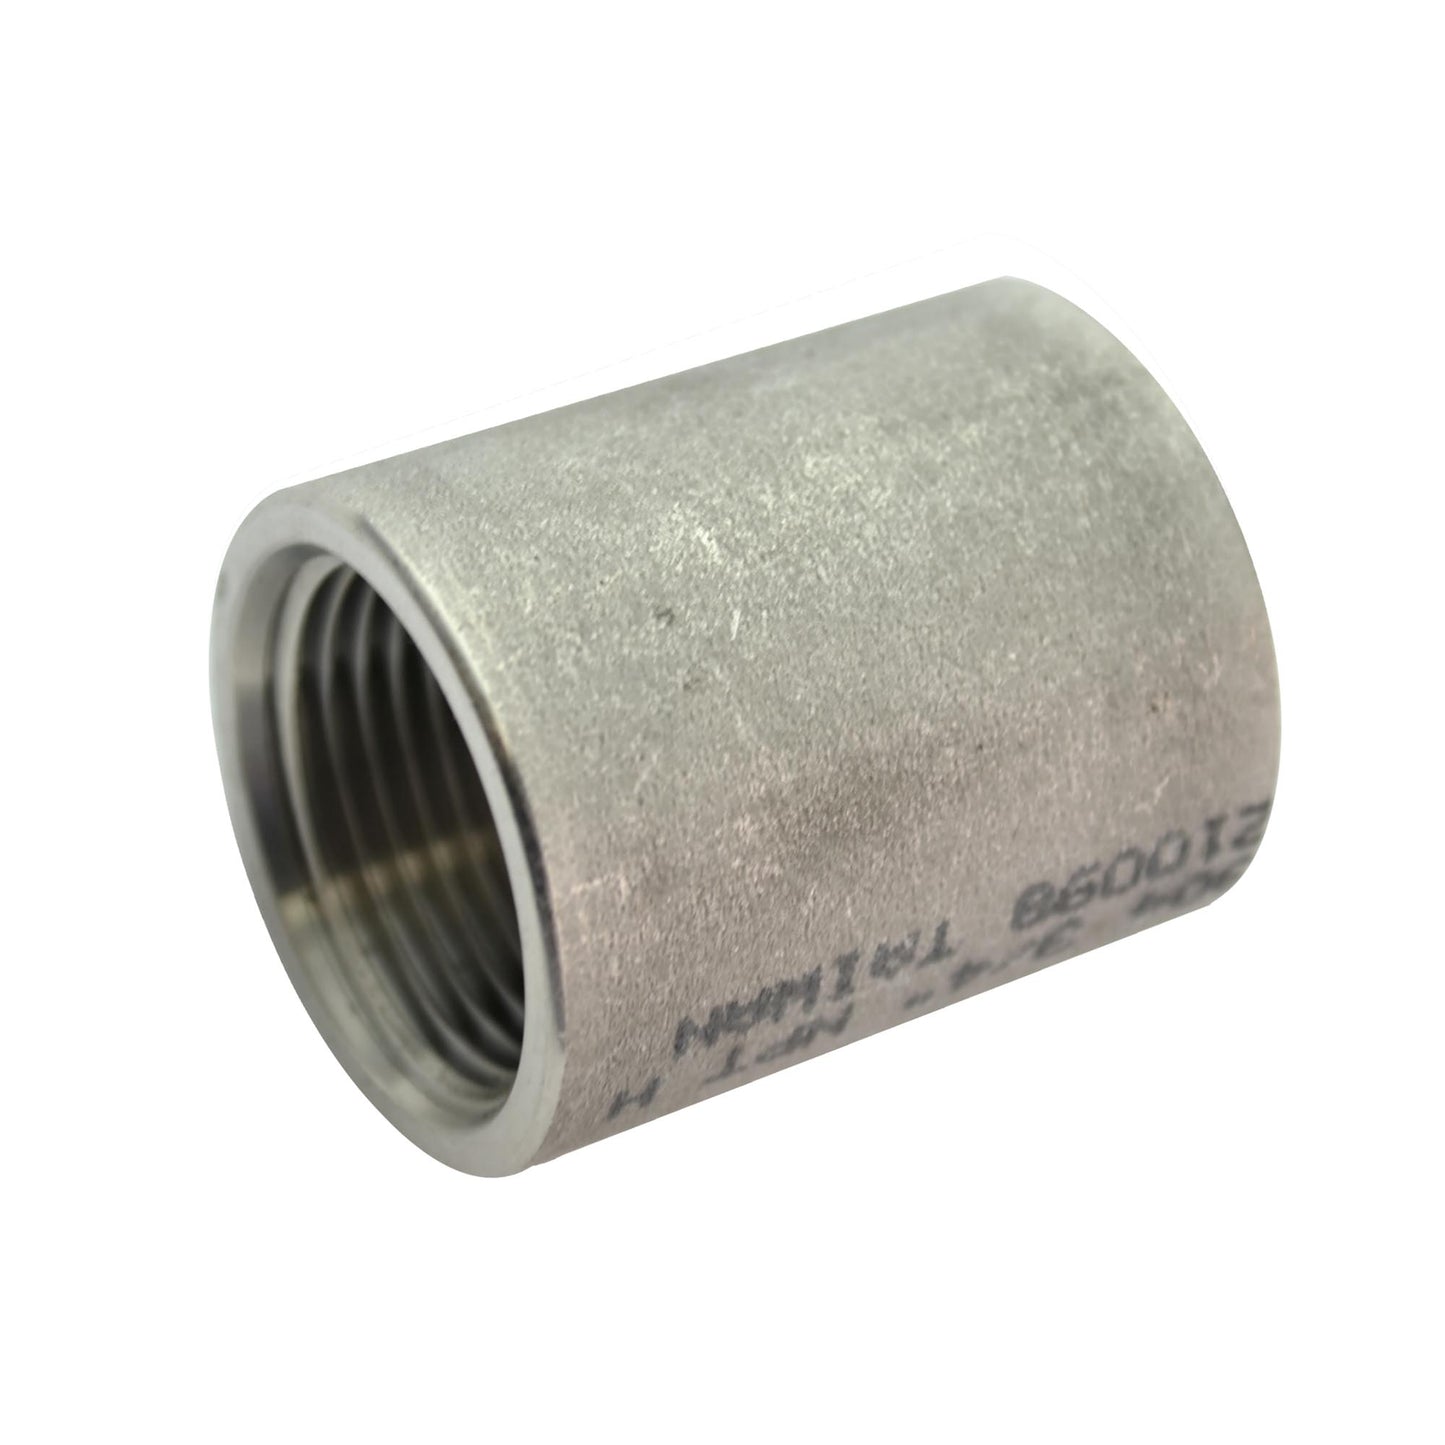 3/4" Coupling - Stainless Steel Fitting